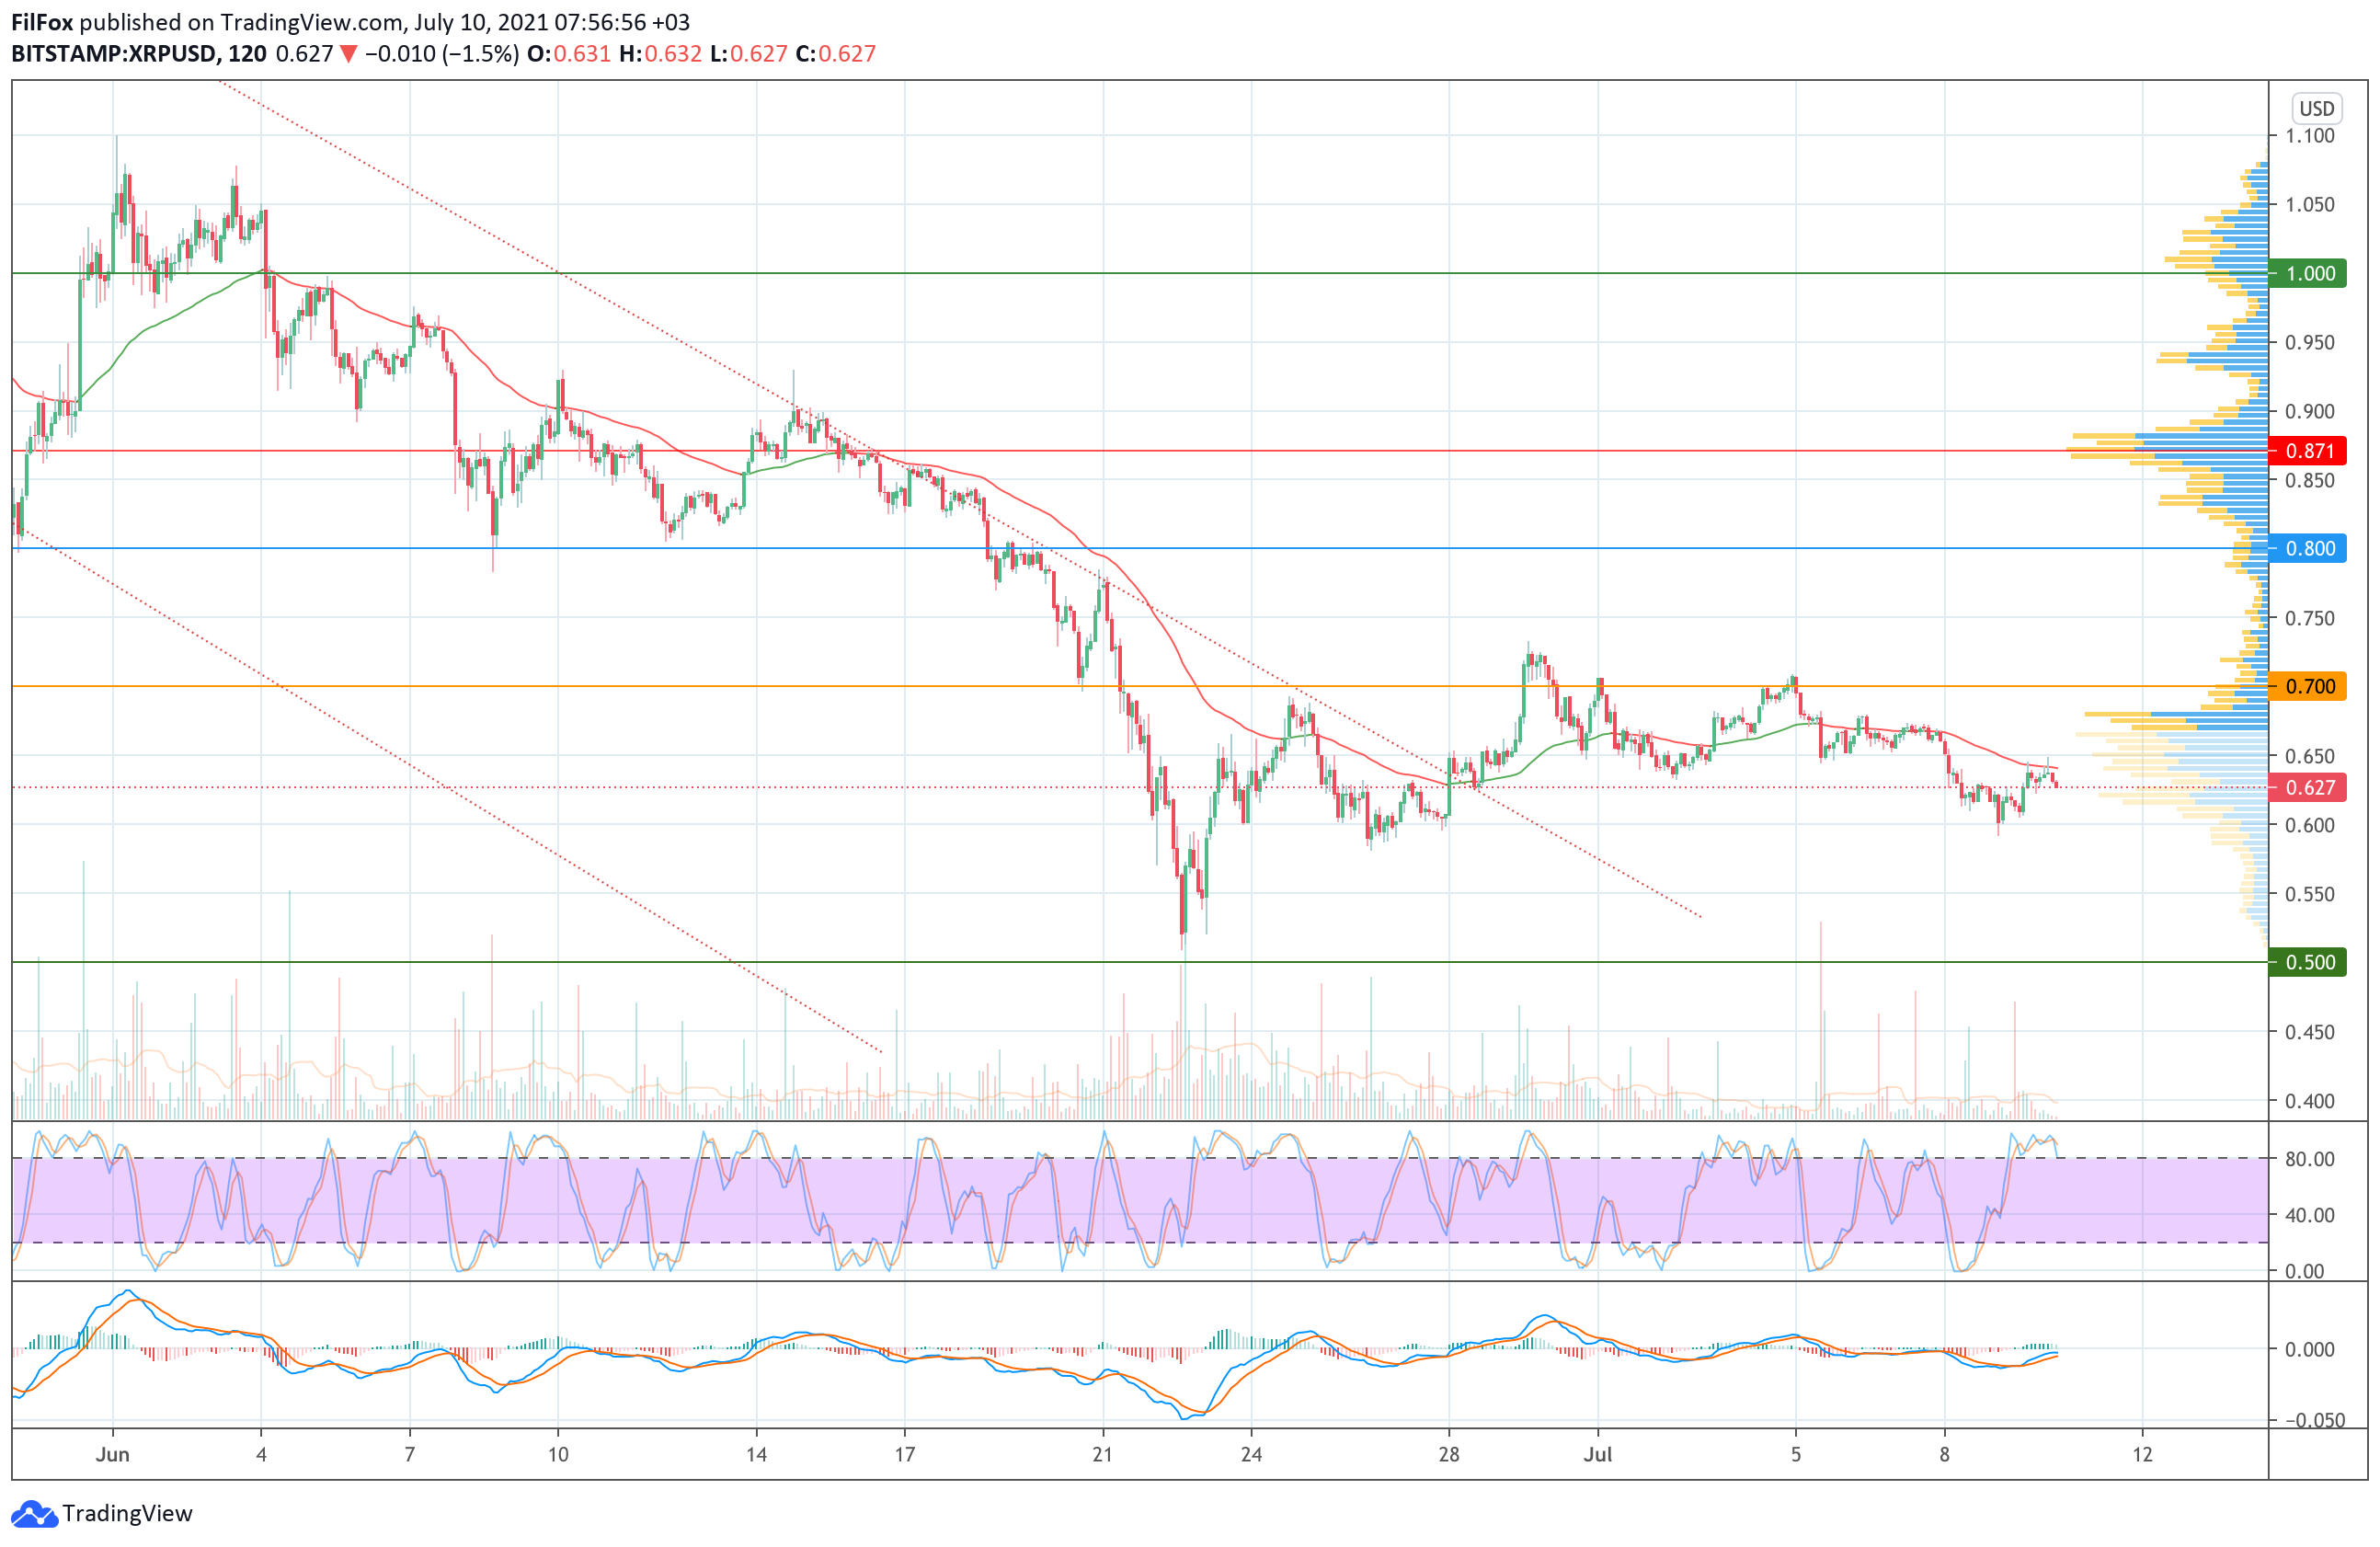 Analysis of the prices of Bitcoin, Ethereum, XRP for 07/10/2021